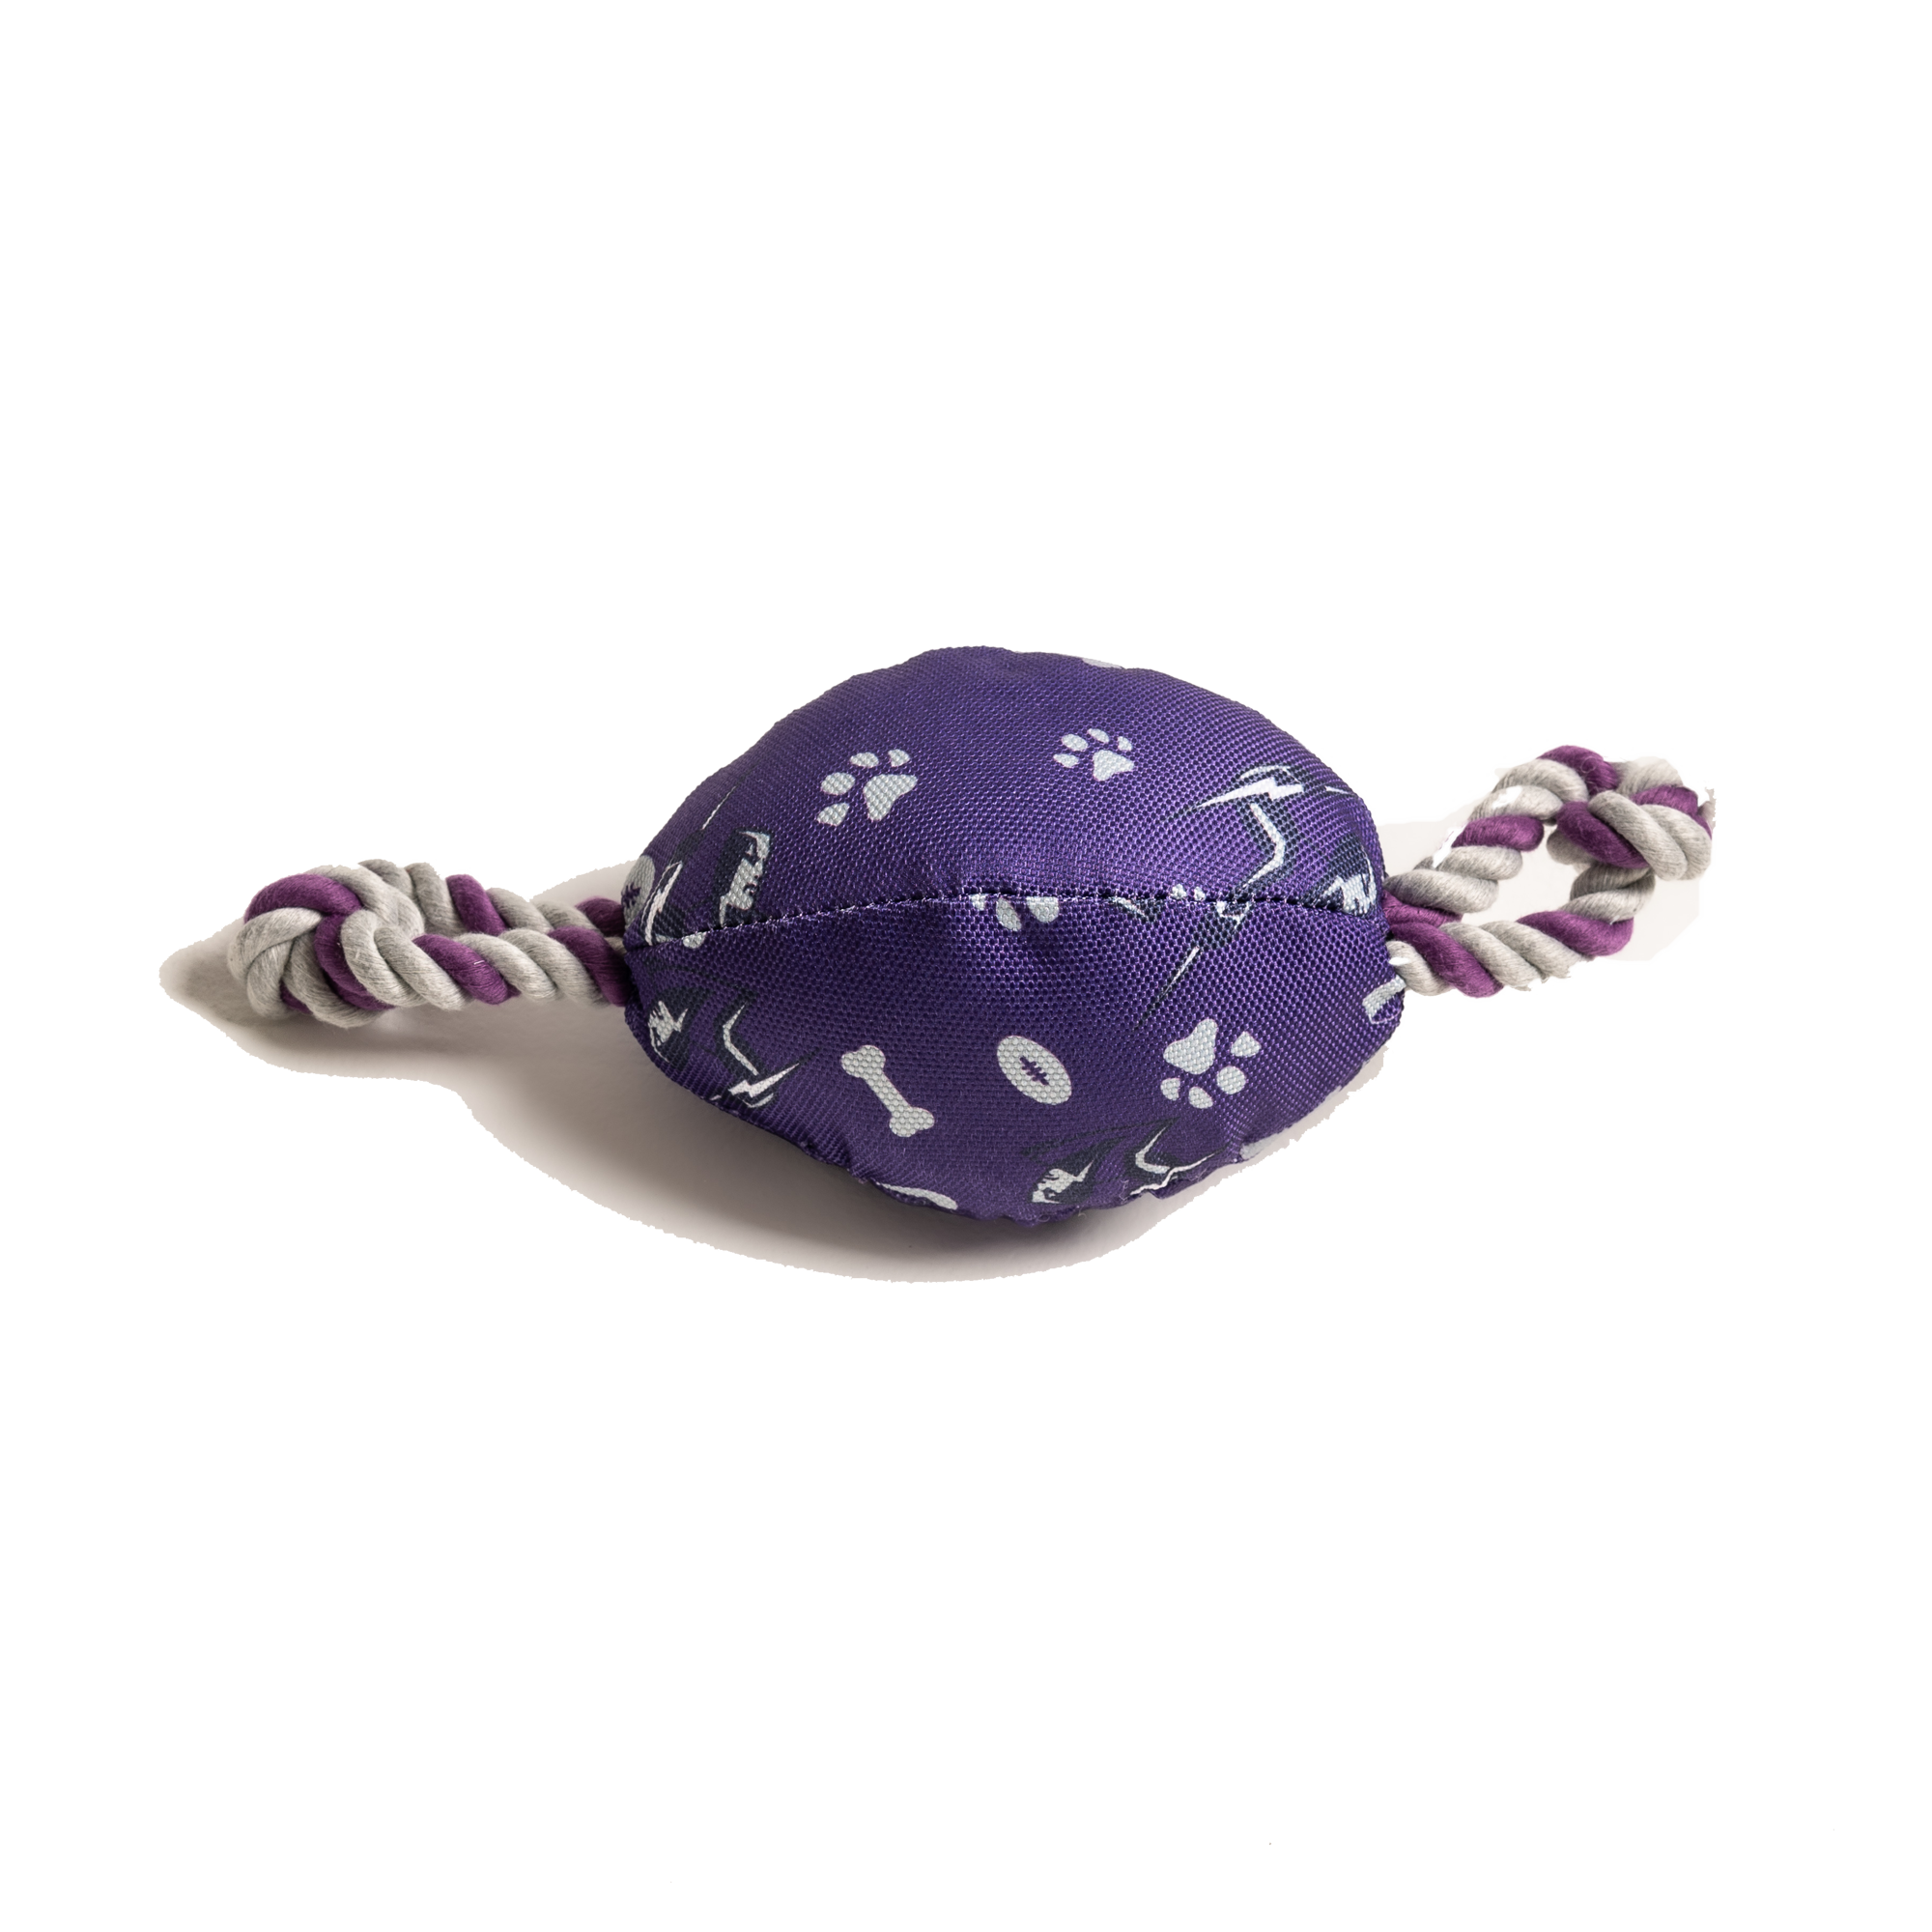 Melbourne Storm NRL Footy Chew Toy